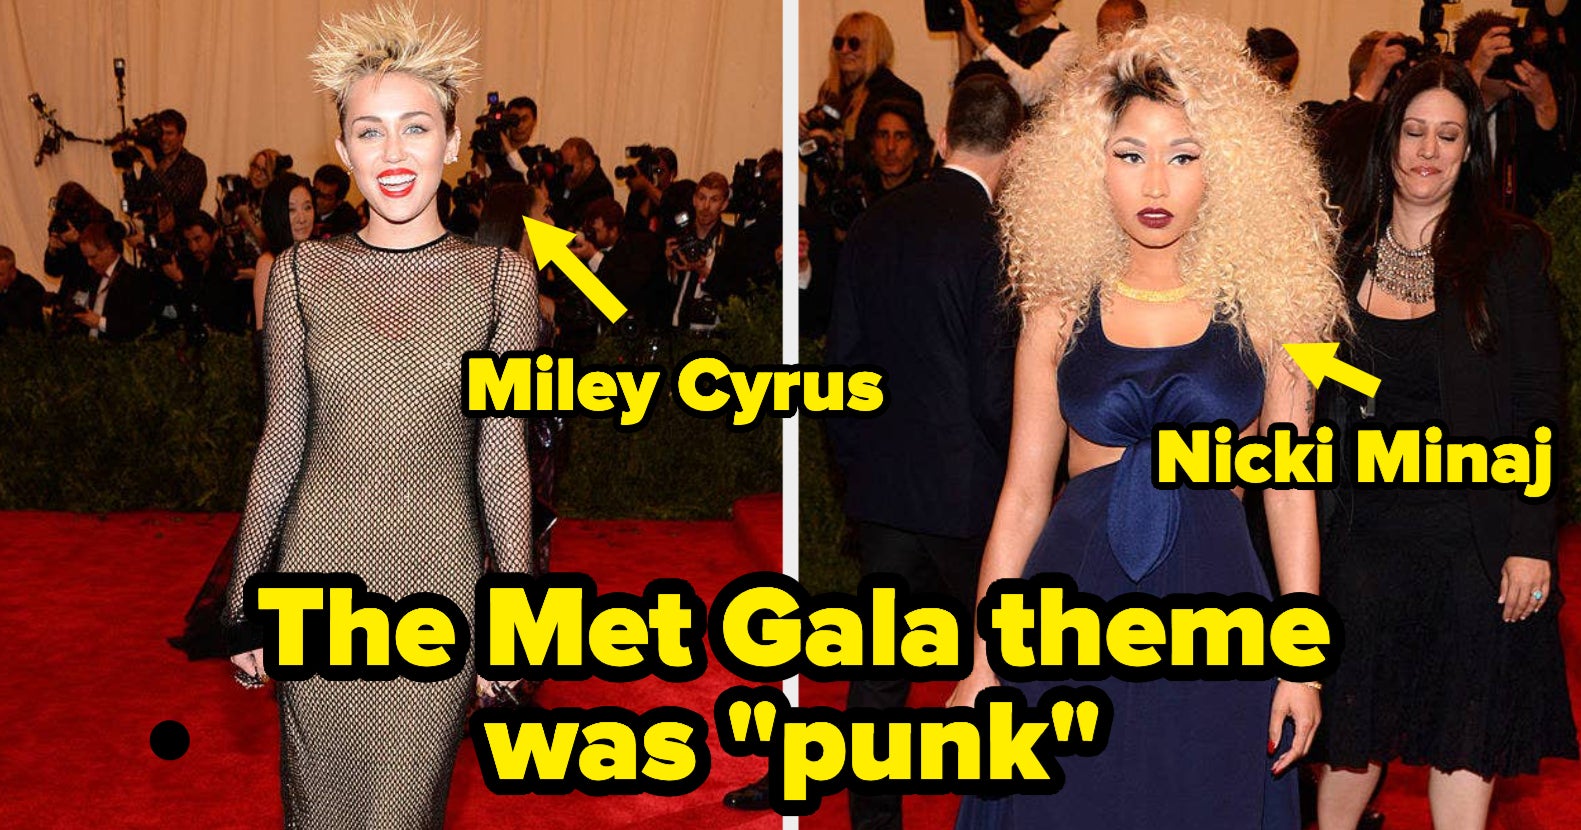 Emma Watson Miley Cyrus Blowjob - How Everyone Dressed Punk At The Met Gala 9 Years Ago